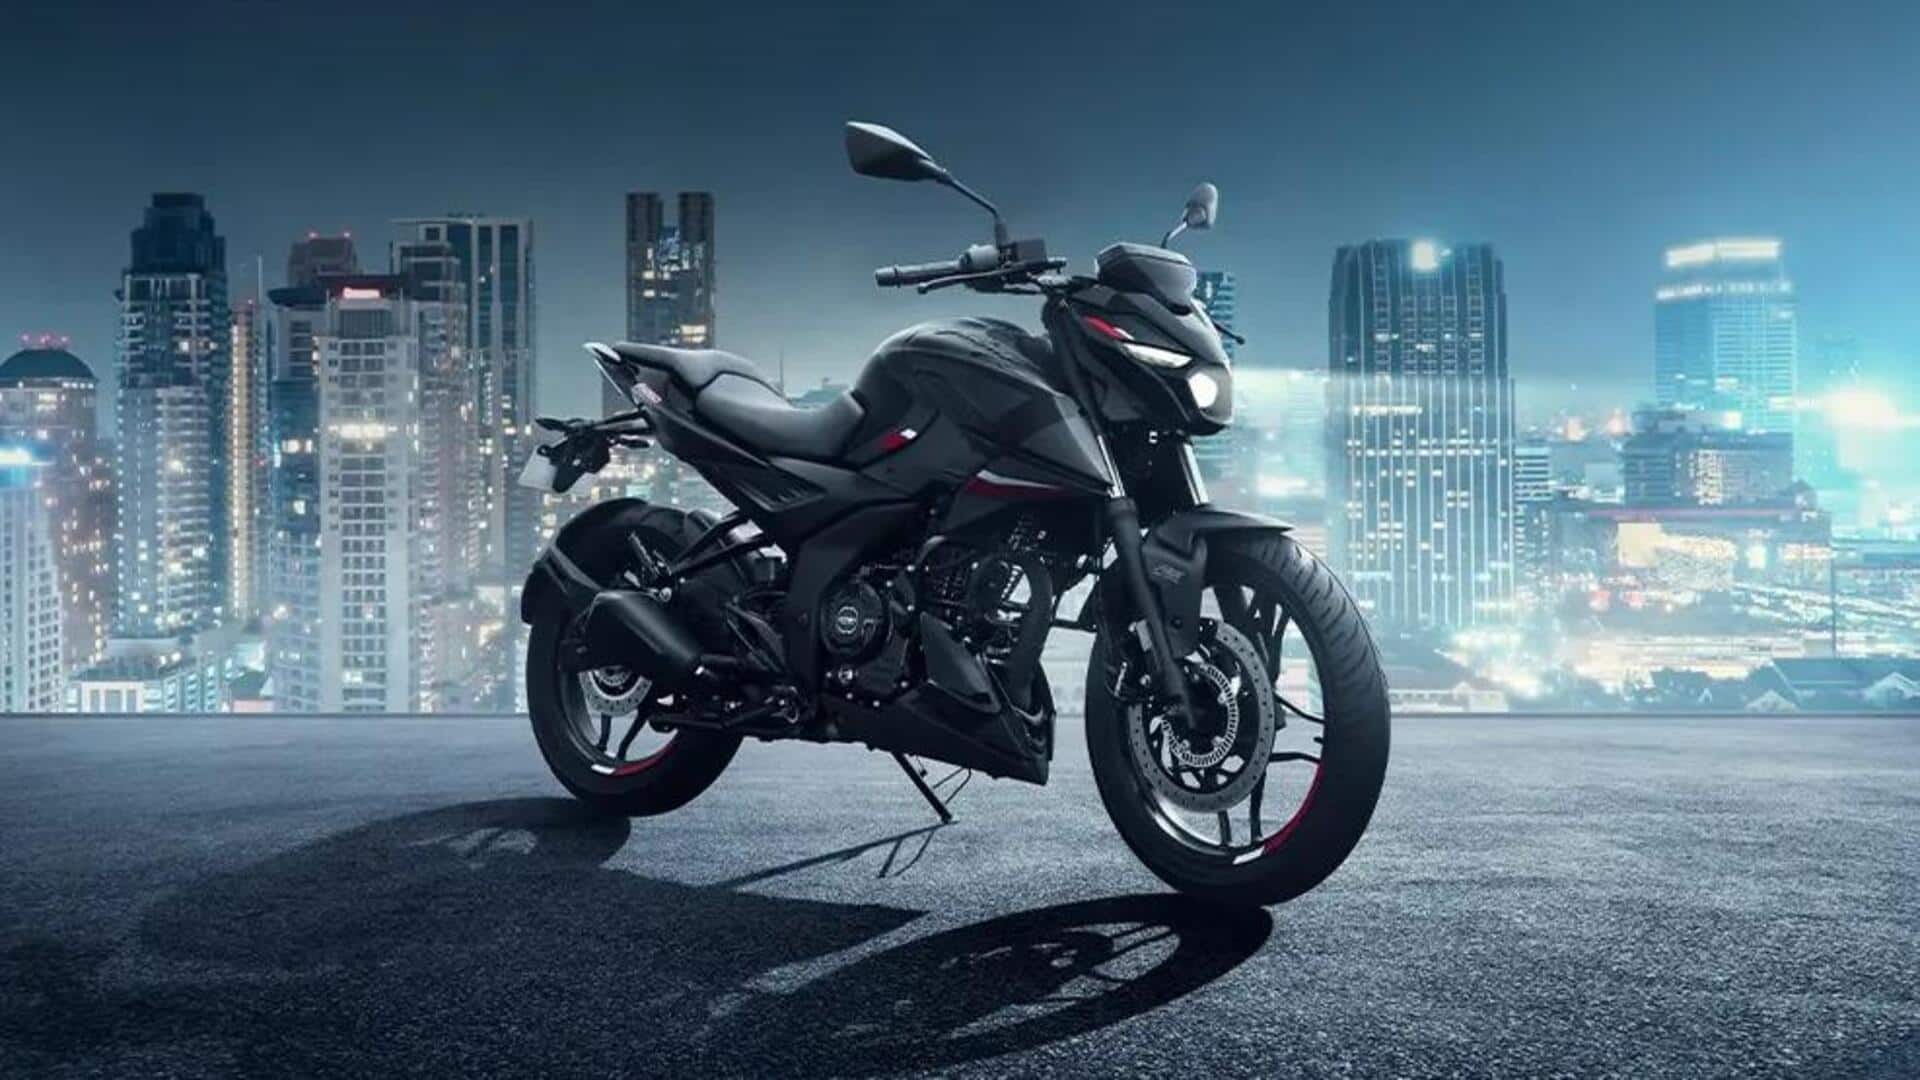 Bajaj to unveil its largest Pulsar model on May 3